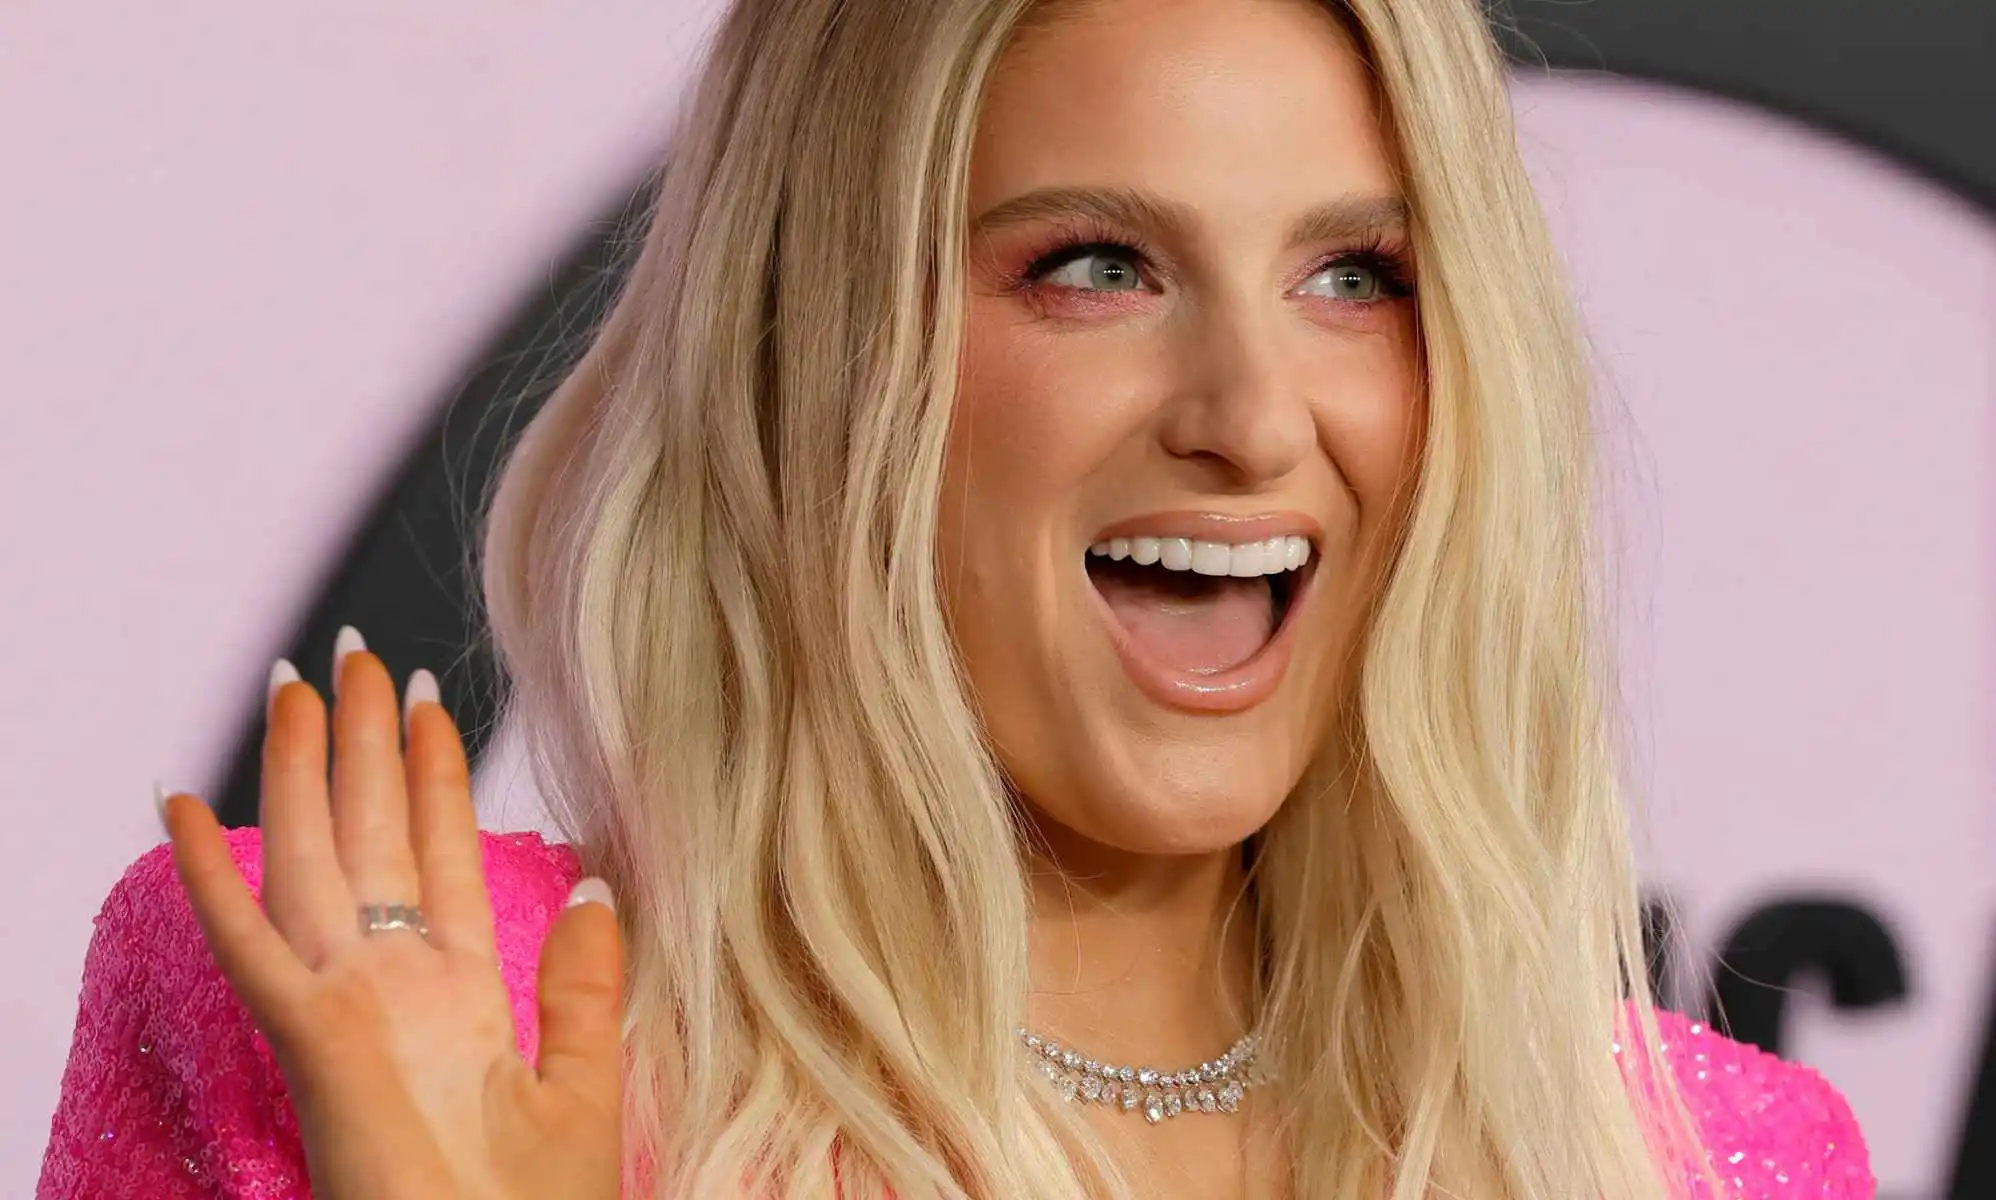 Pop icon Meghan Trainor reveals the meaning behind Made You Look